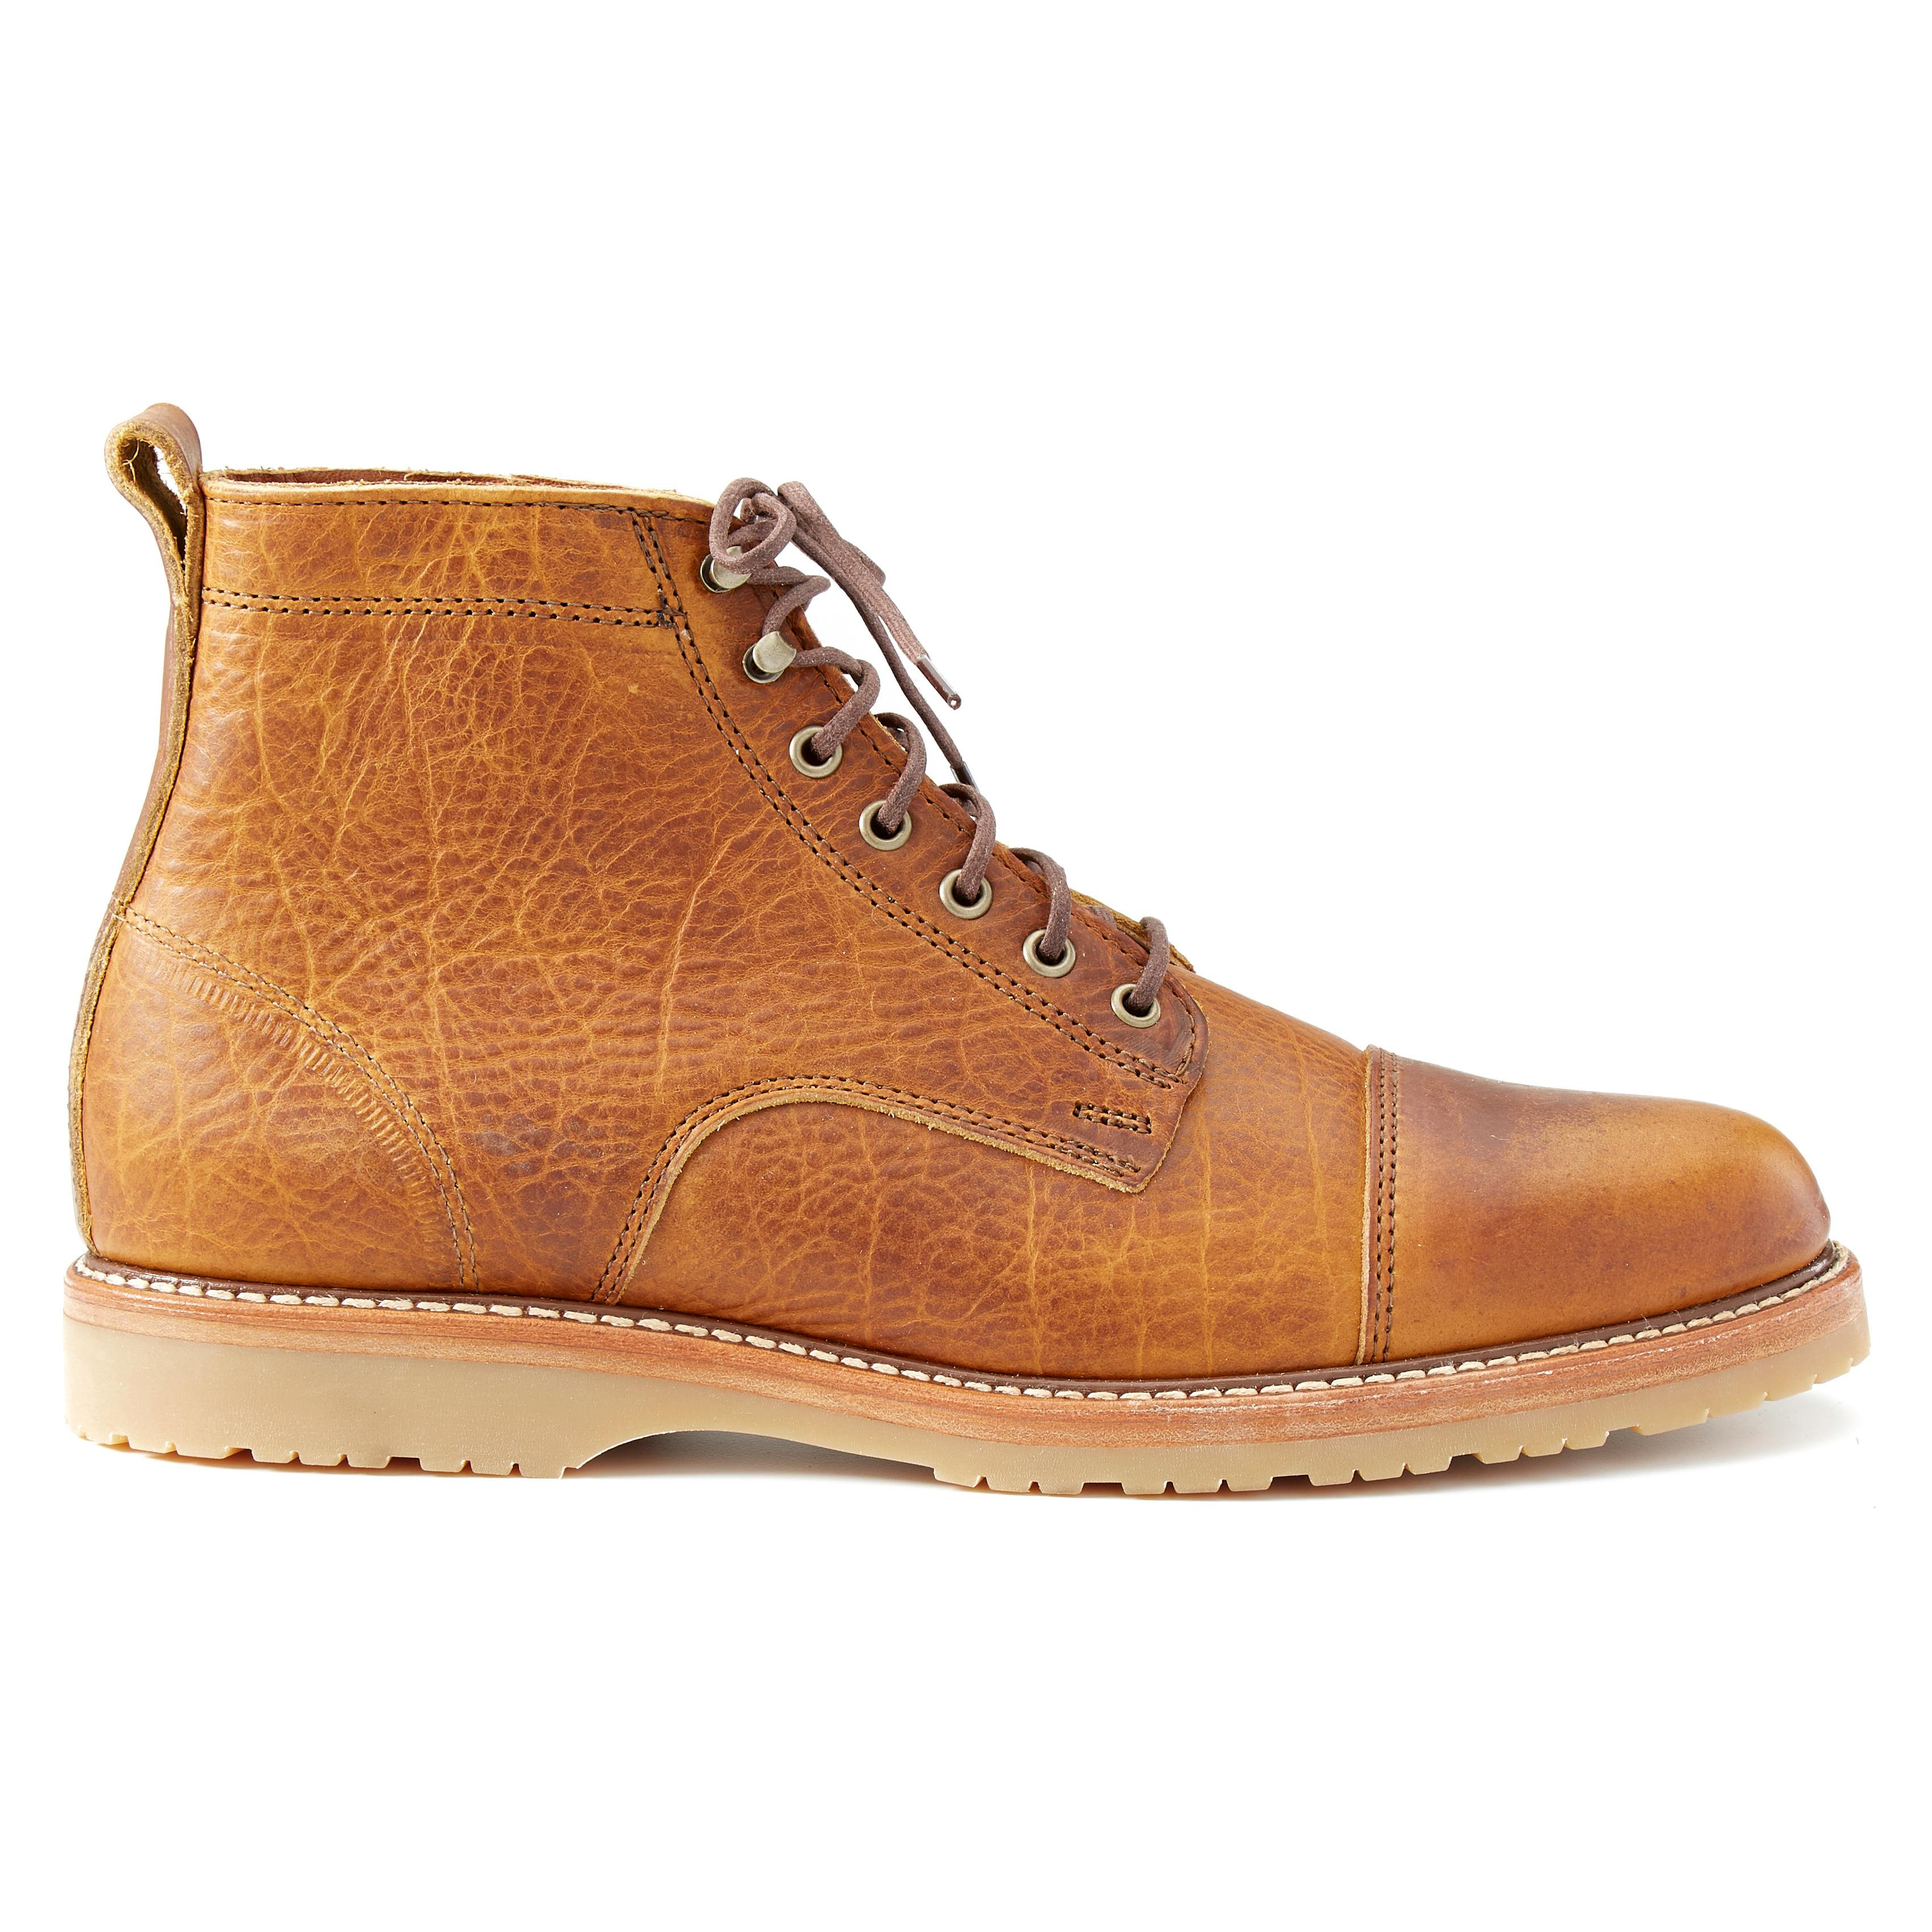 Rancourt & Co. Wolf Boot